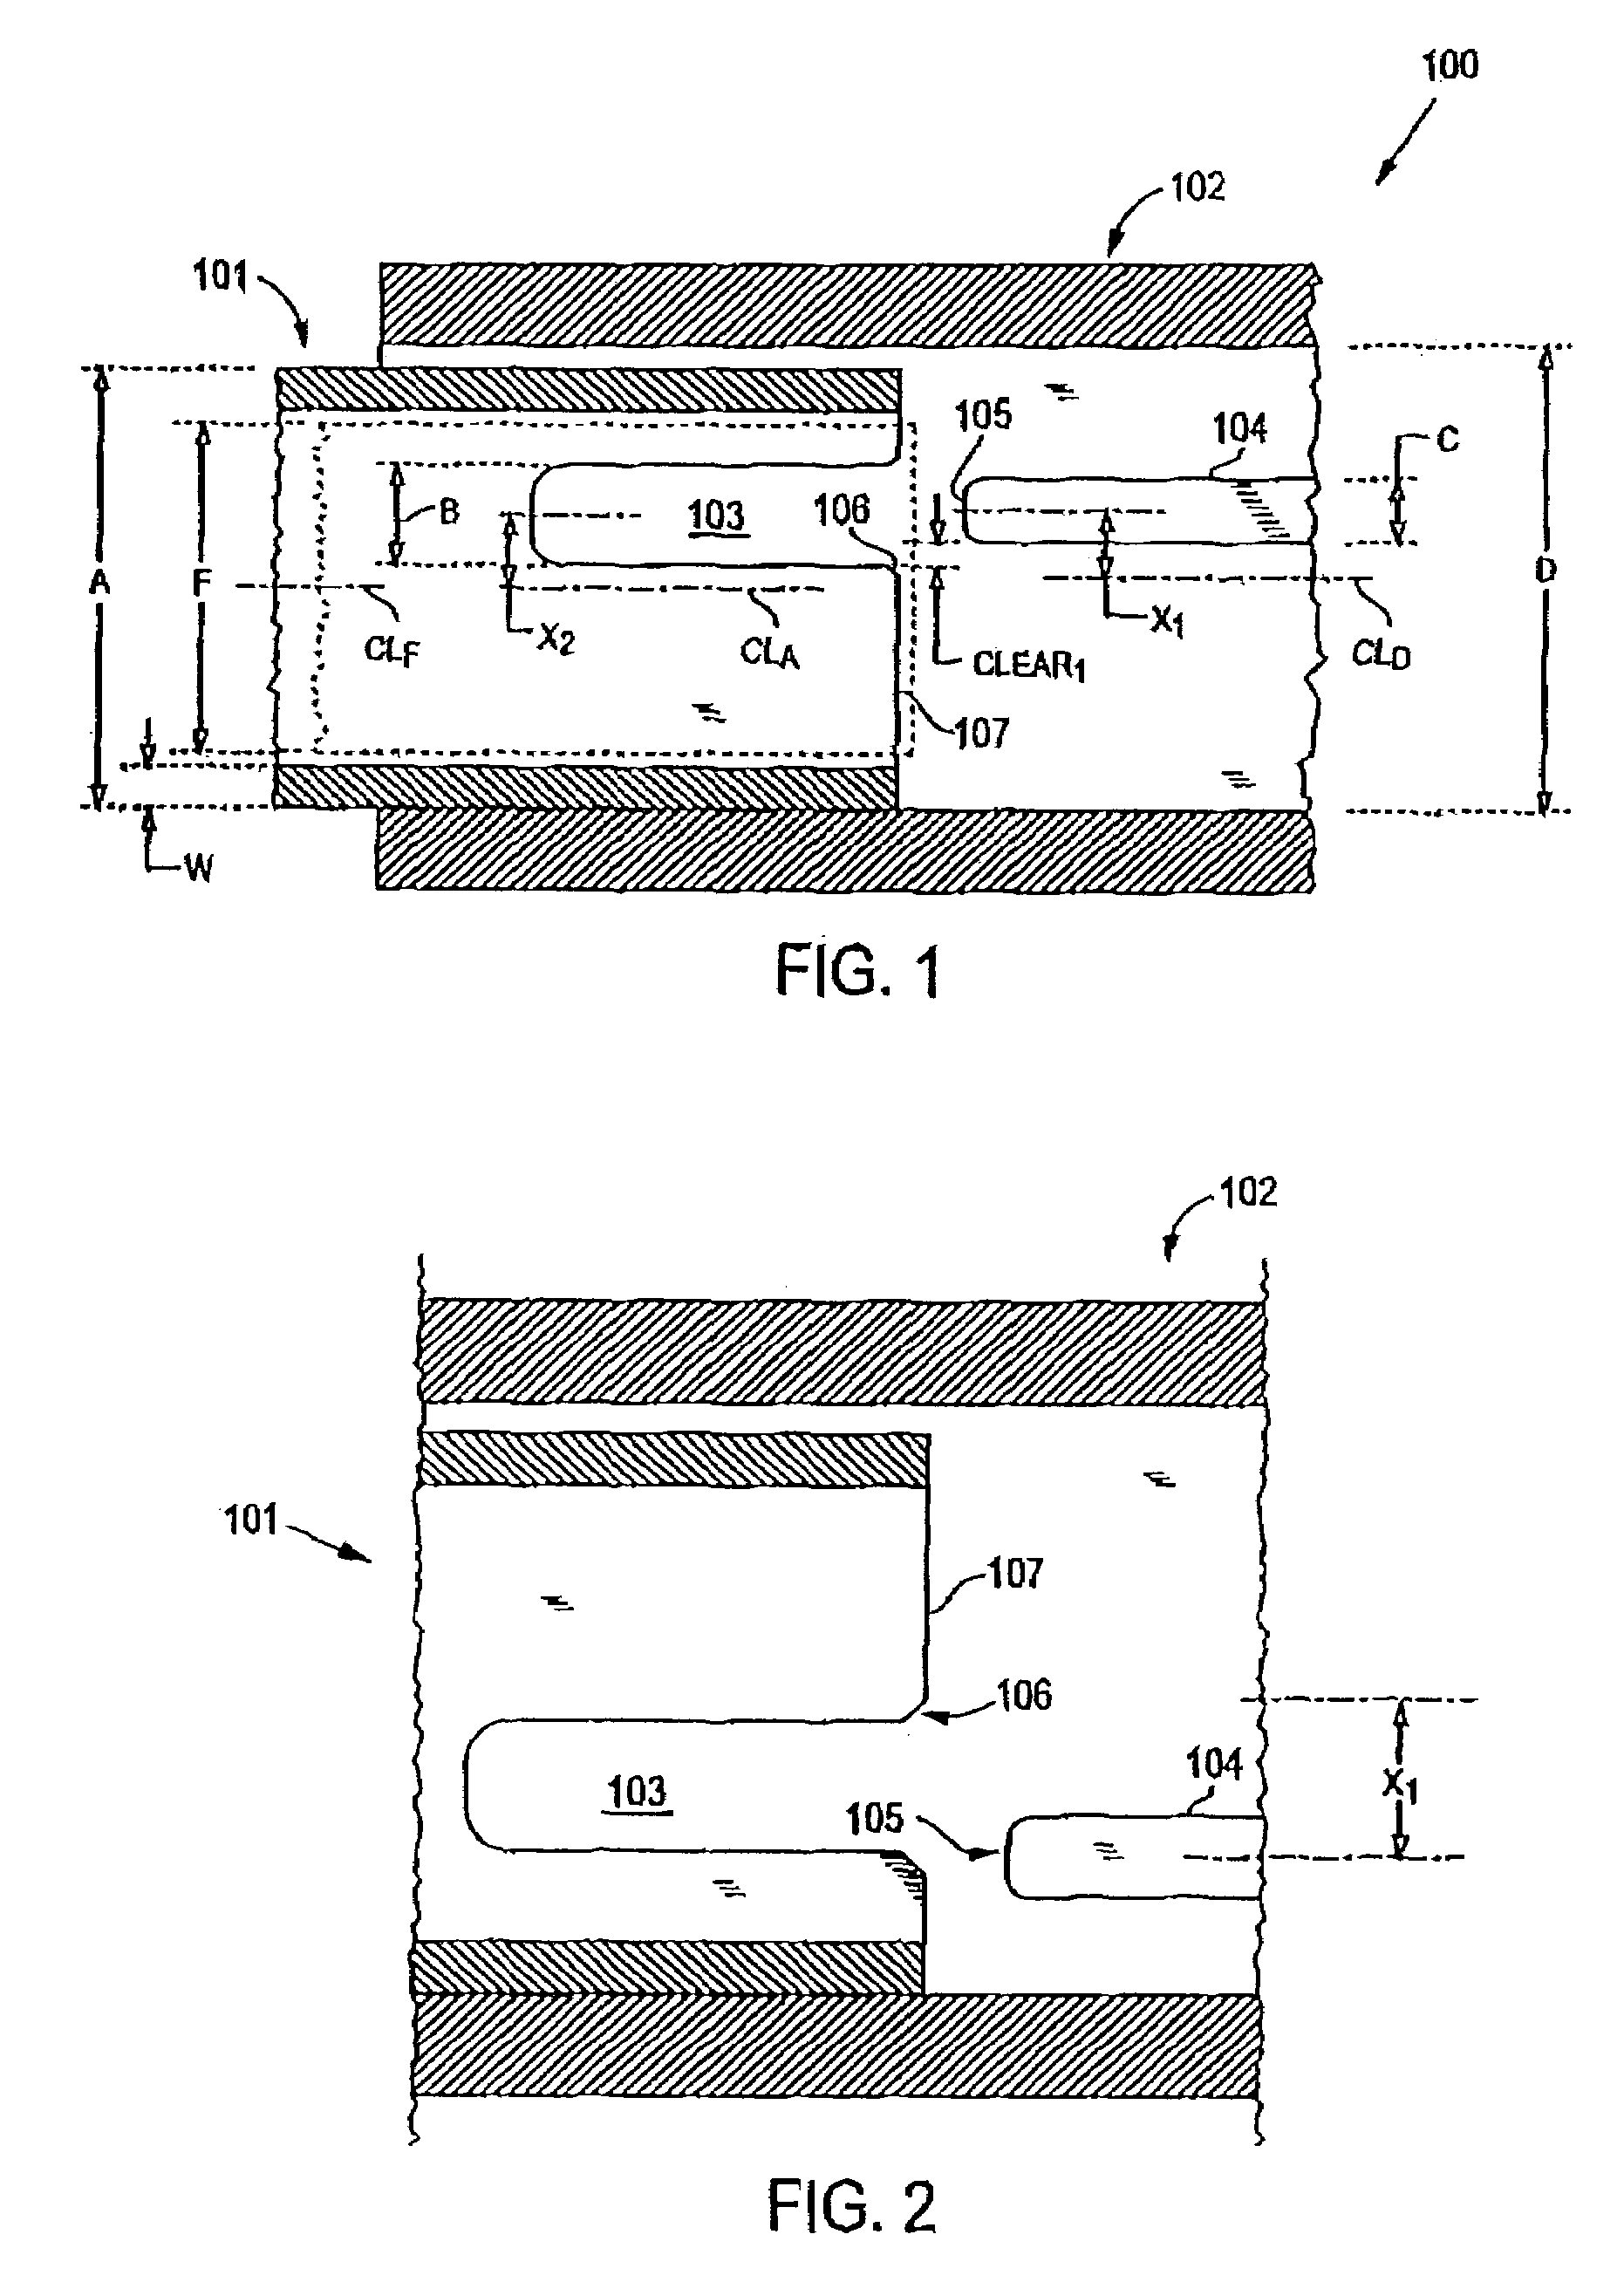 Connector and receptacle containing a physical security feature